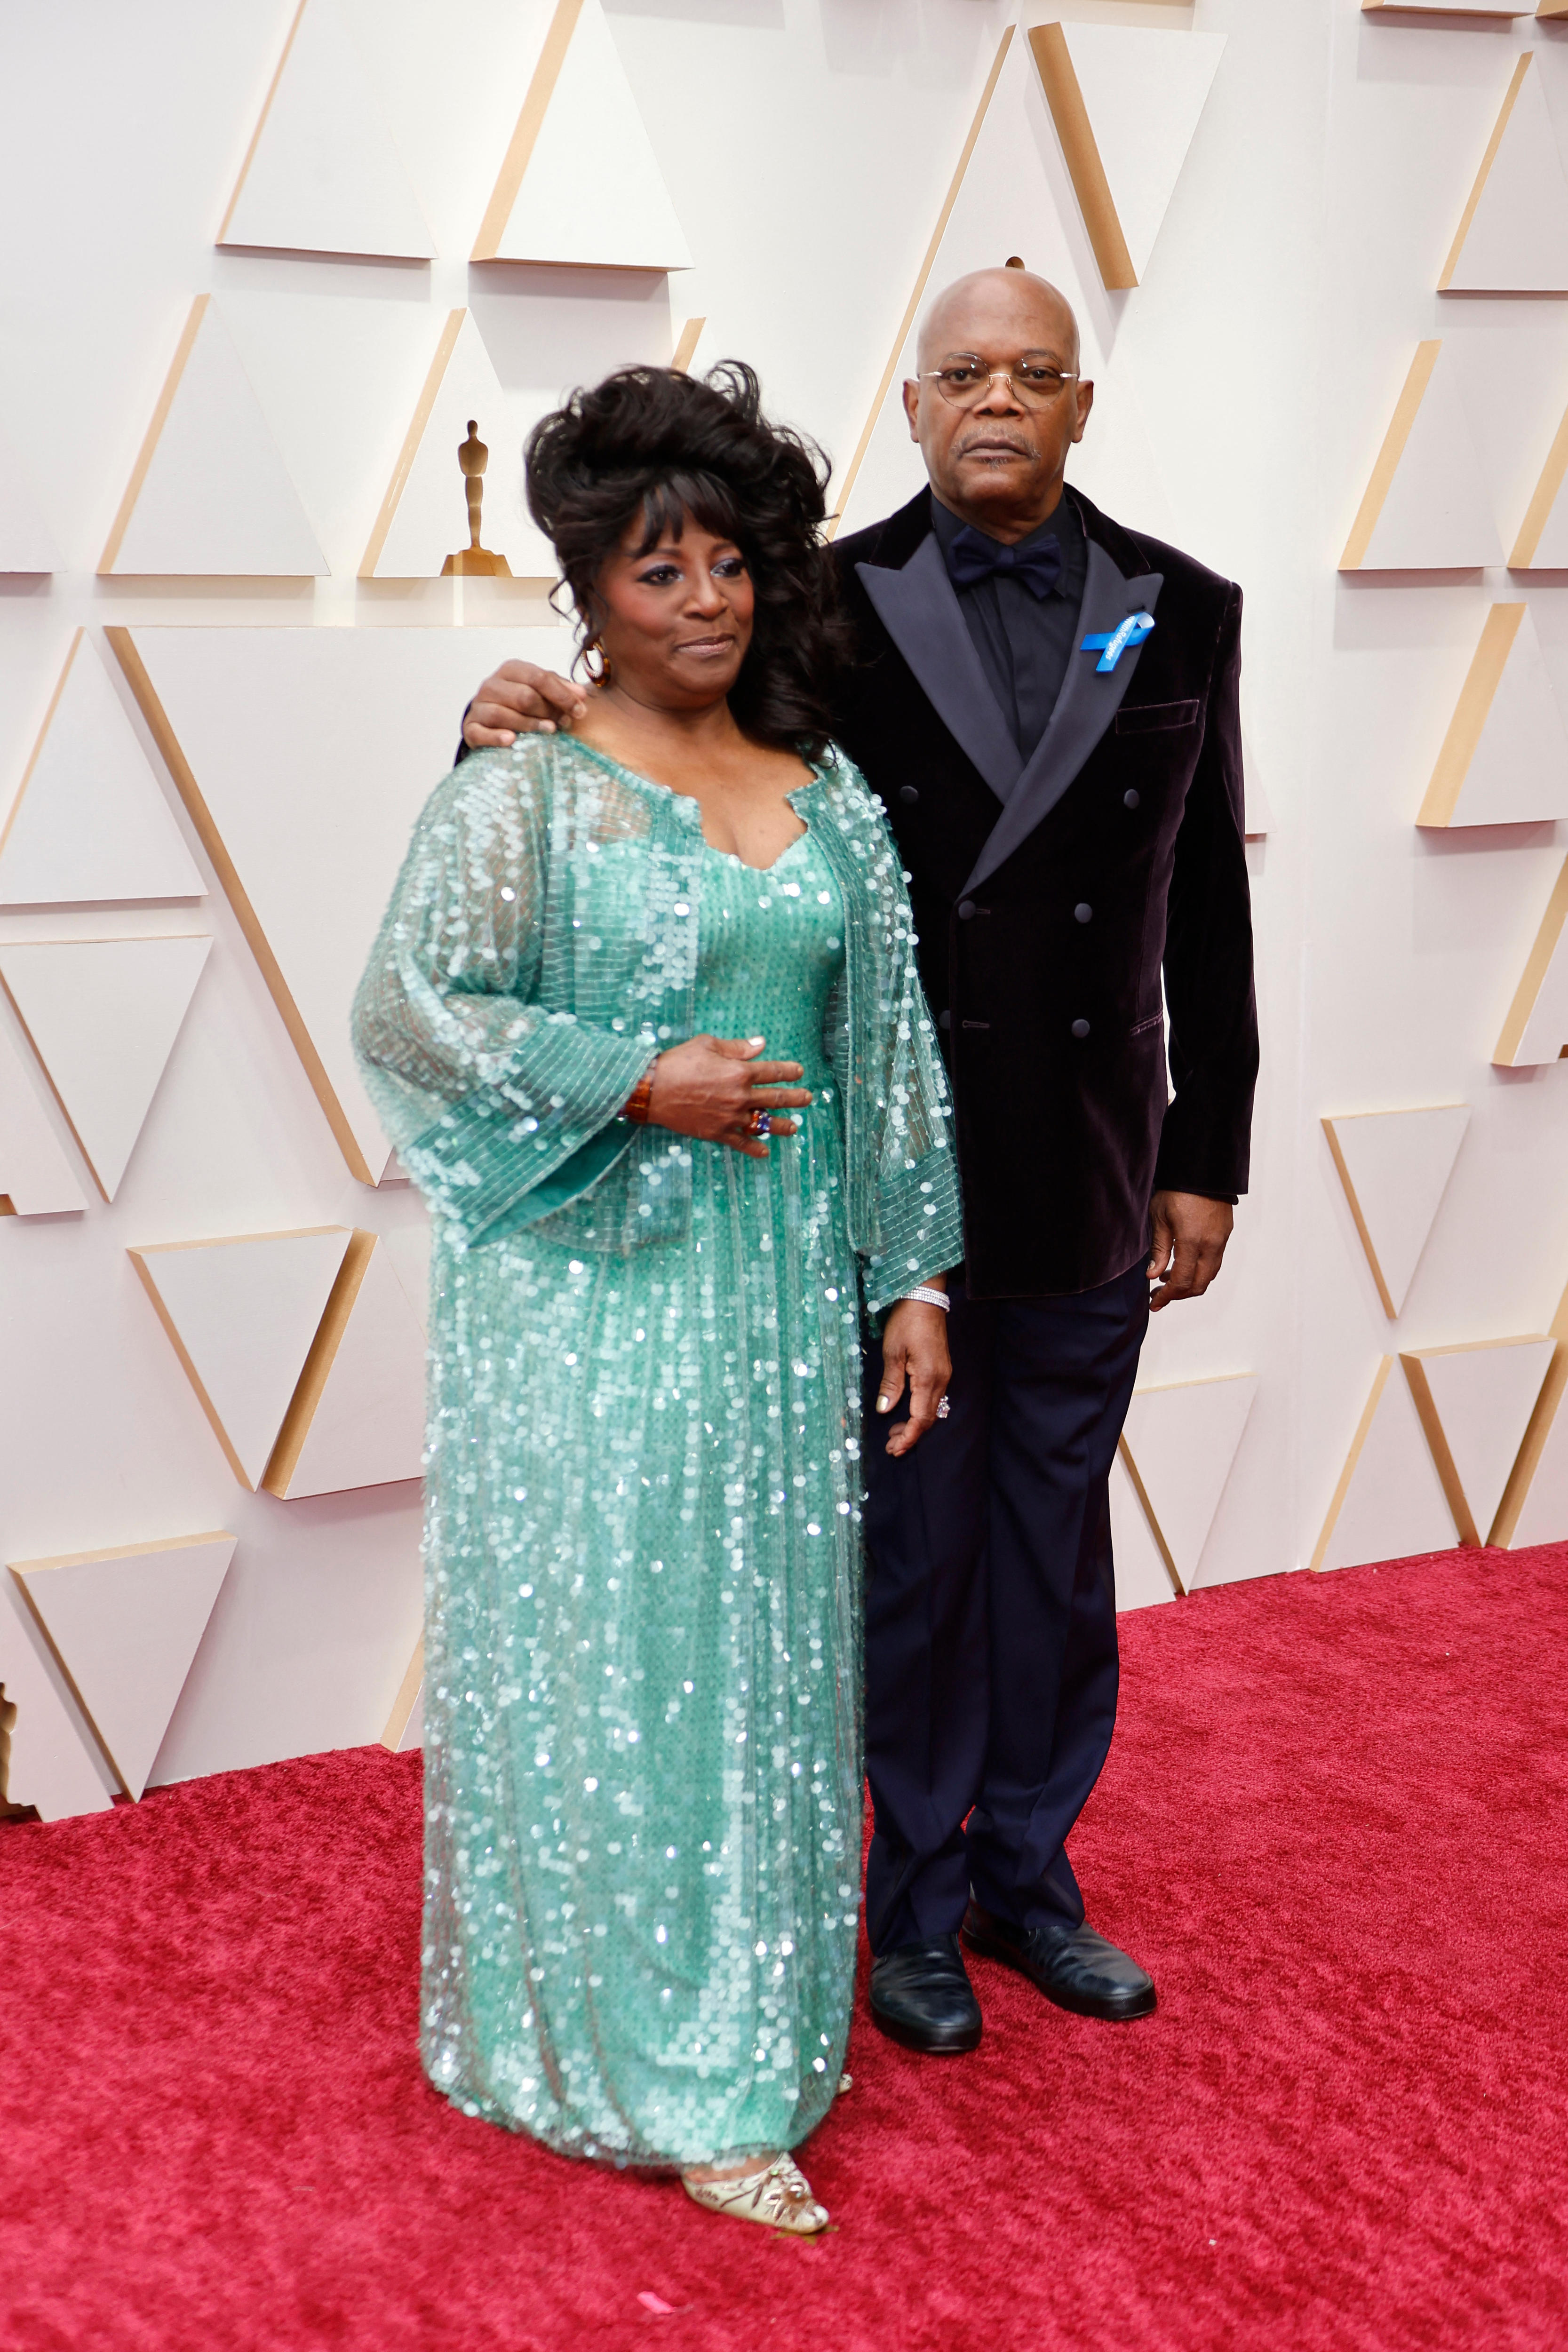 Actor Samuel L. Jackson in a dark suit and wife LaTanya Richardson Jackson in a light blue dress on Oscars red carpet.